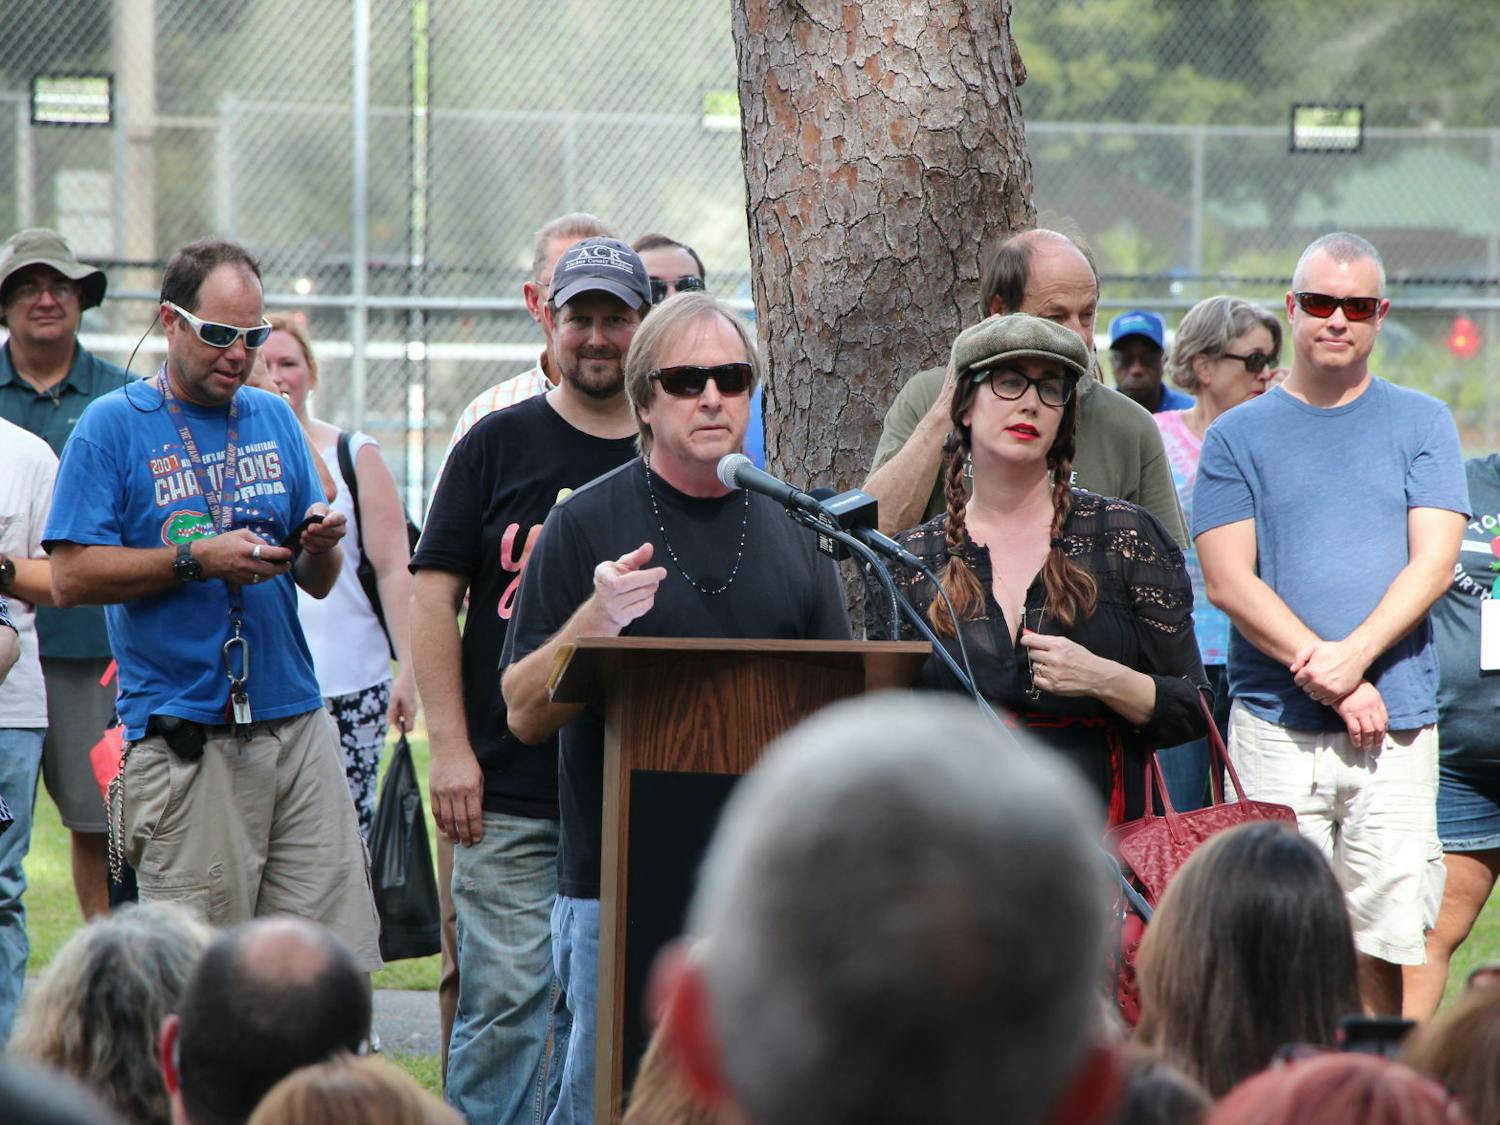 Tom Petty's brother and daughter, Bruce and Adria Petty stand behind the podium at the dedication of Tom Petty Park on Oct. 20, 2018. Both gave made statements and thanked the community before the unveiling of the new sign.